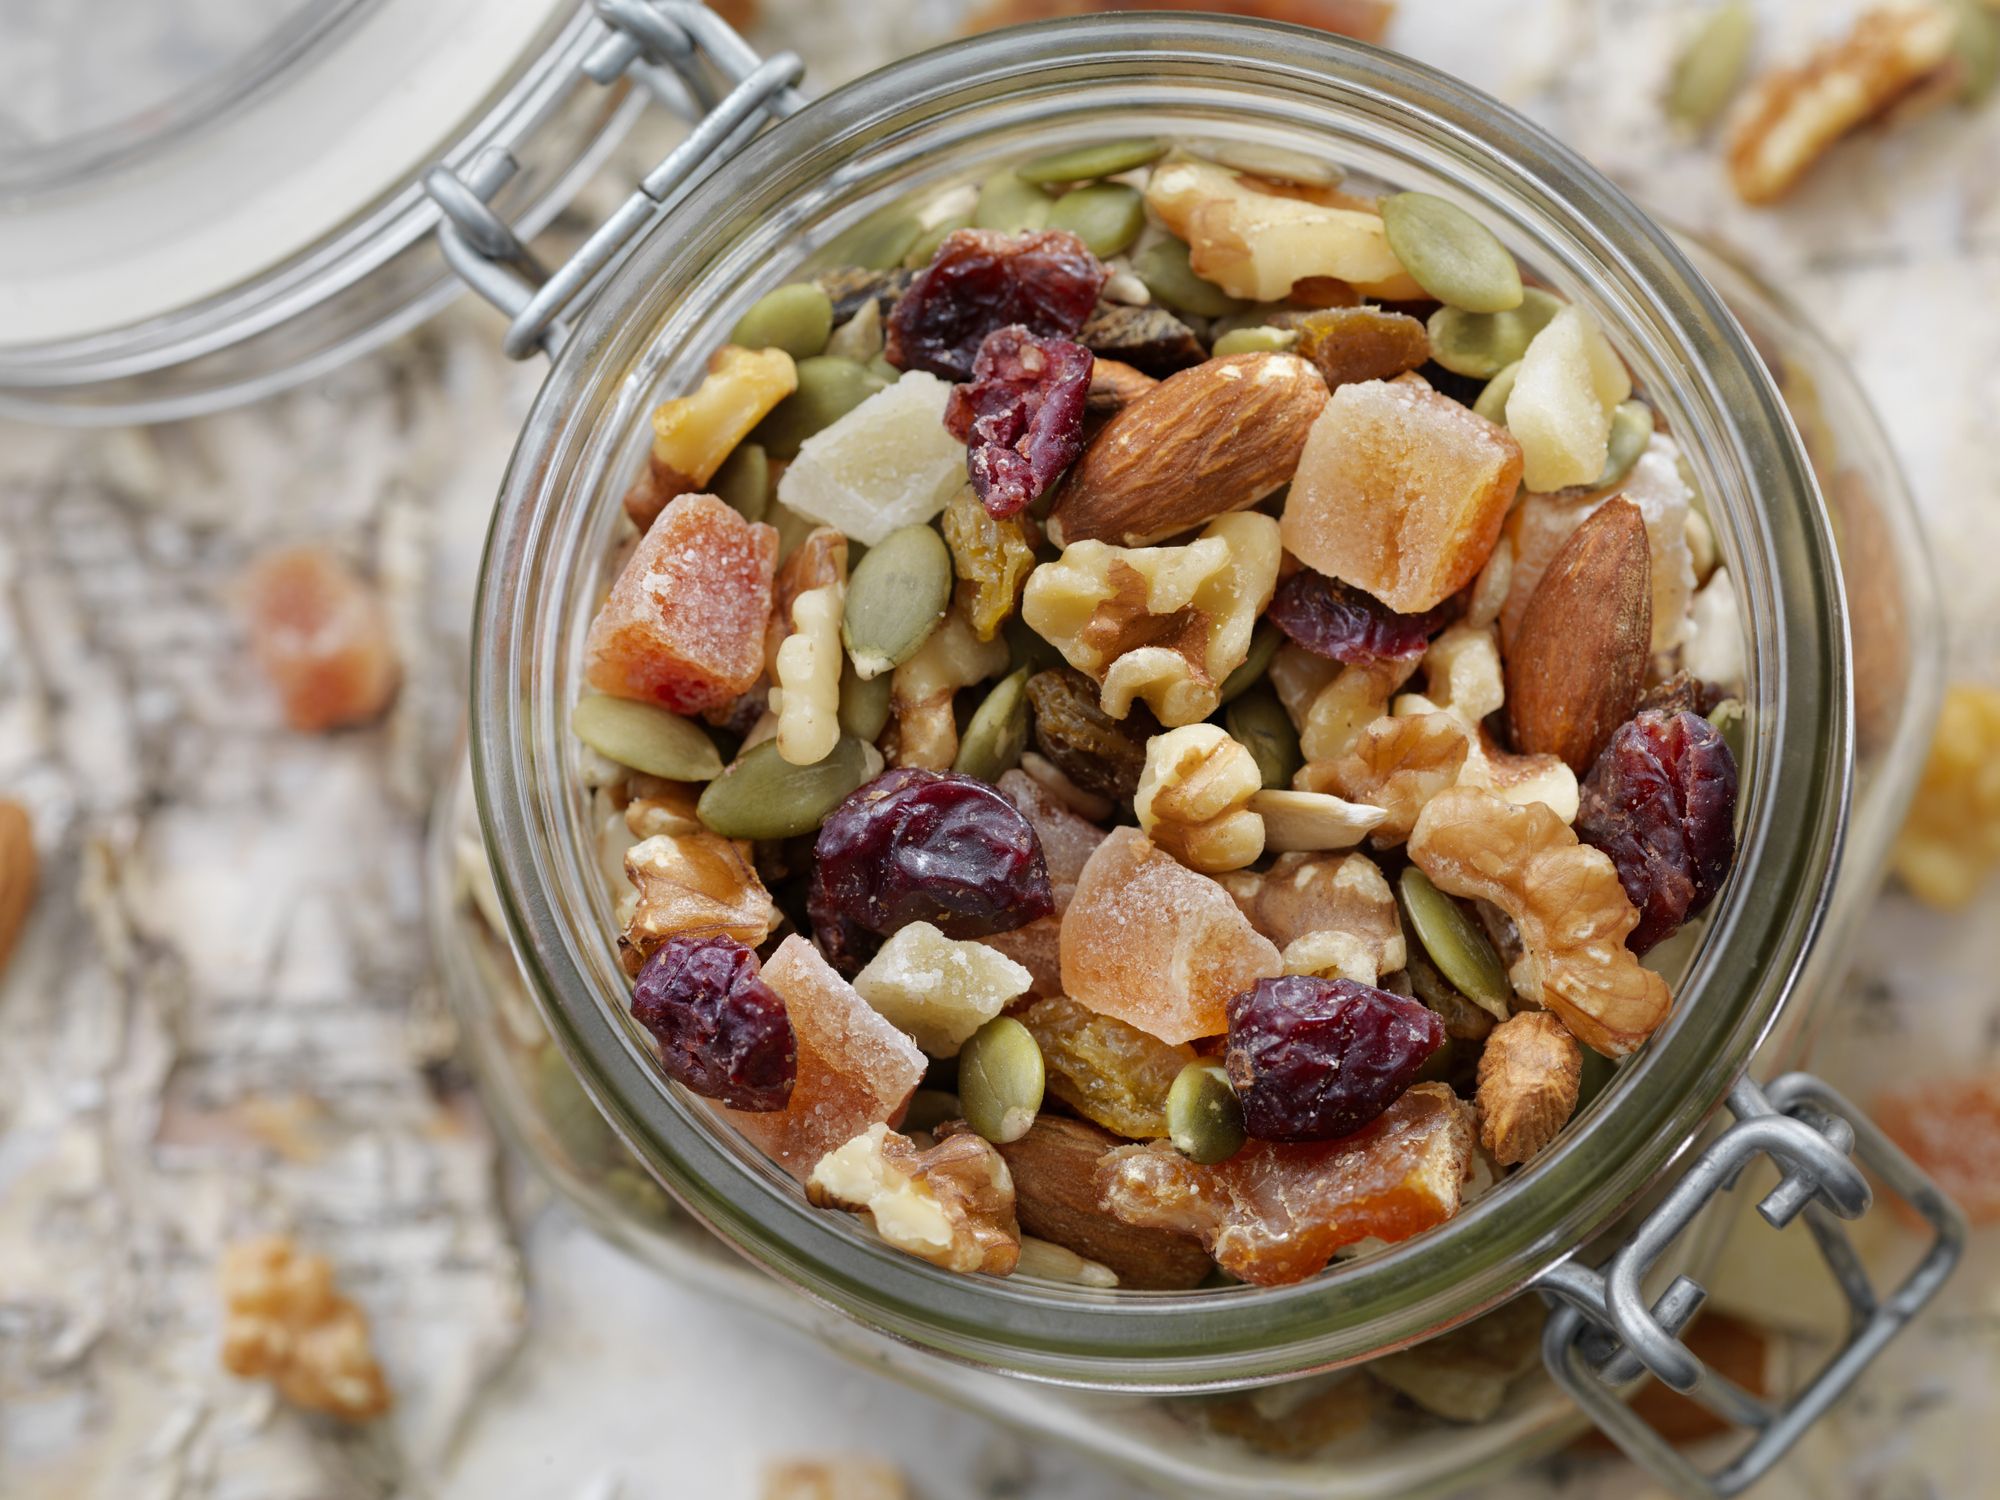 Healthy Trail Mix: 21 Trail Mix Recipes for Any Craving